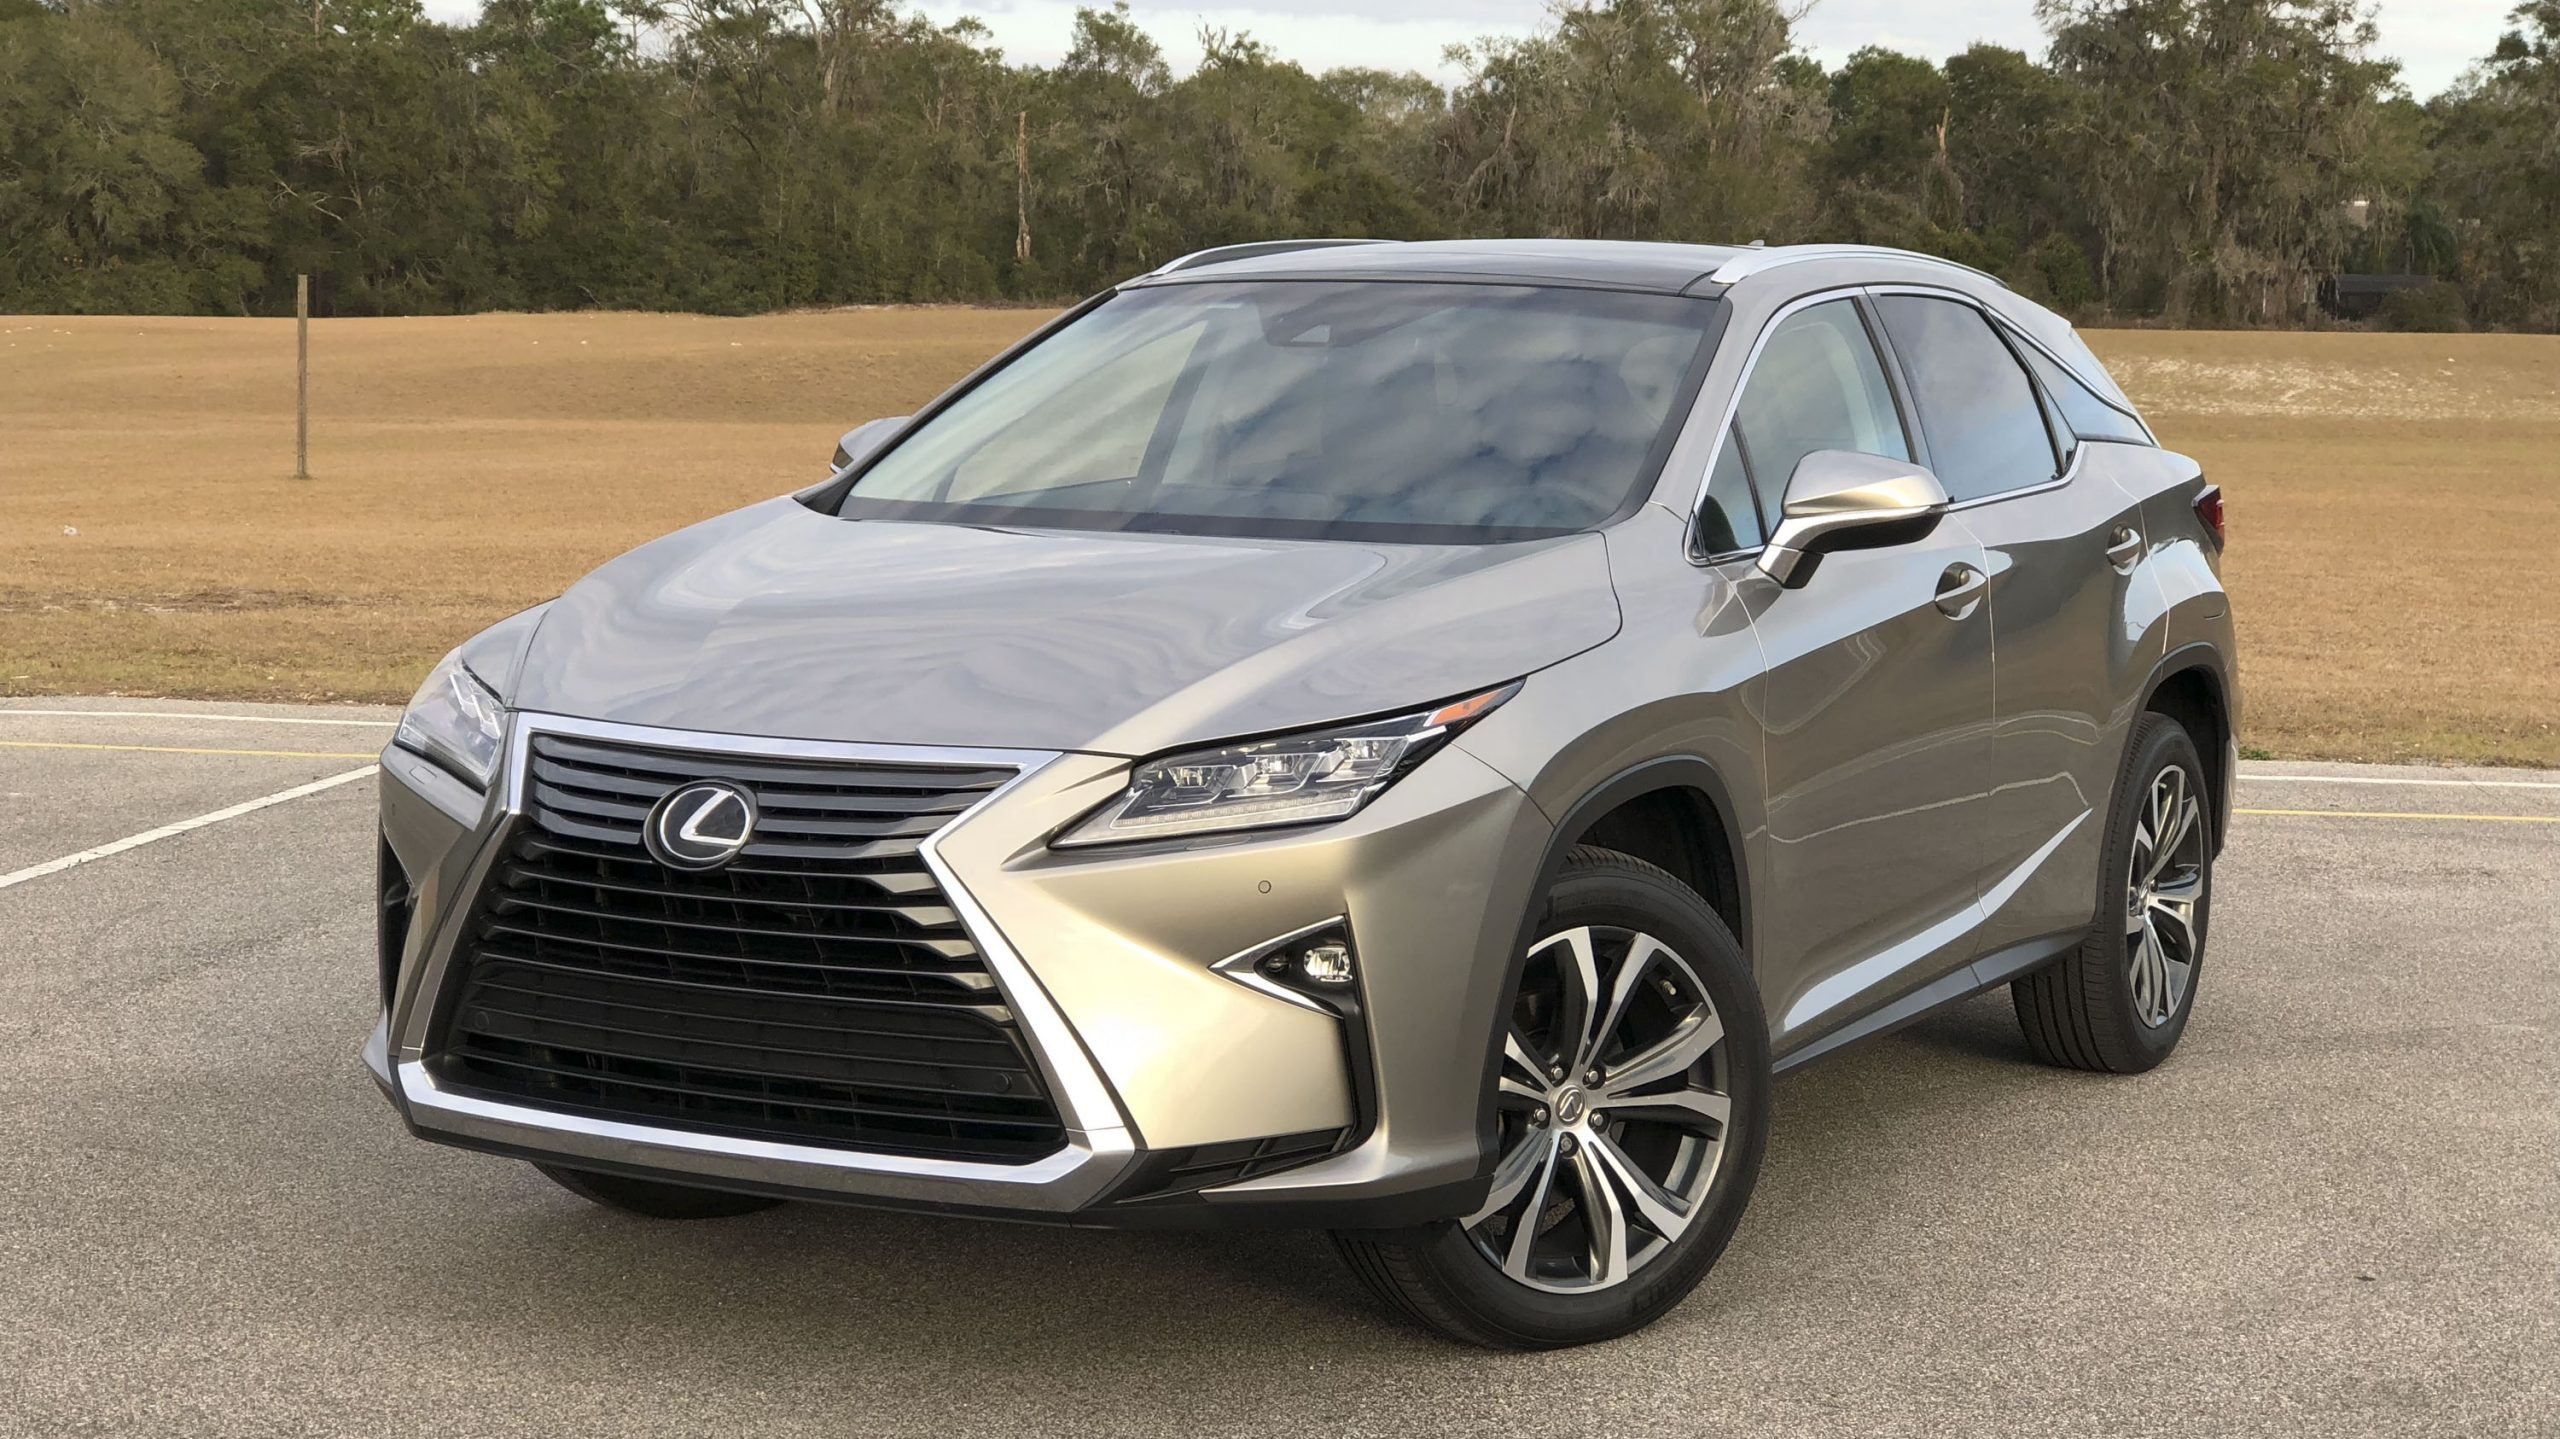 New 2022 Lexus Rx 350 Options And Packages Oil Type Options Lexus